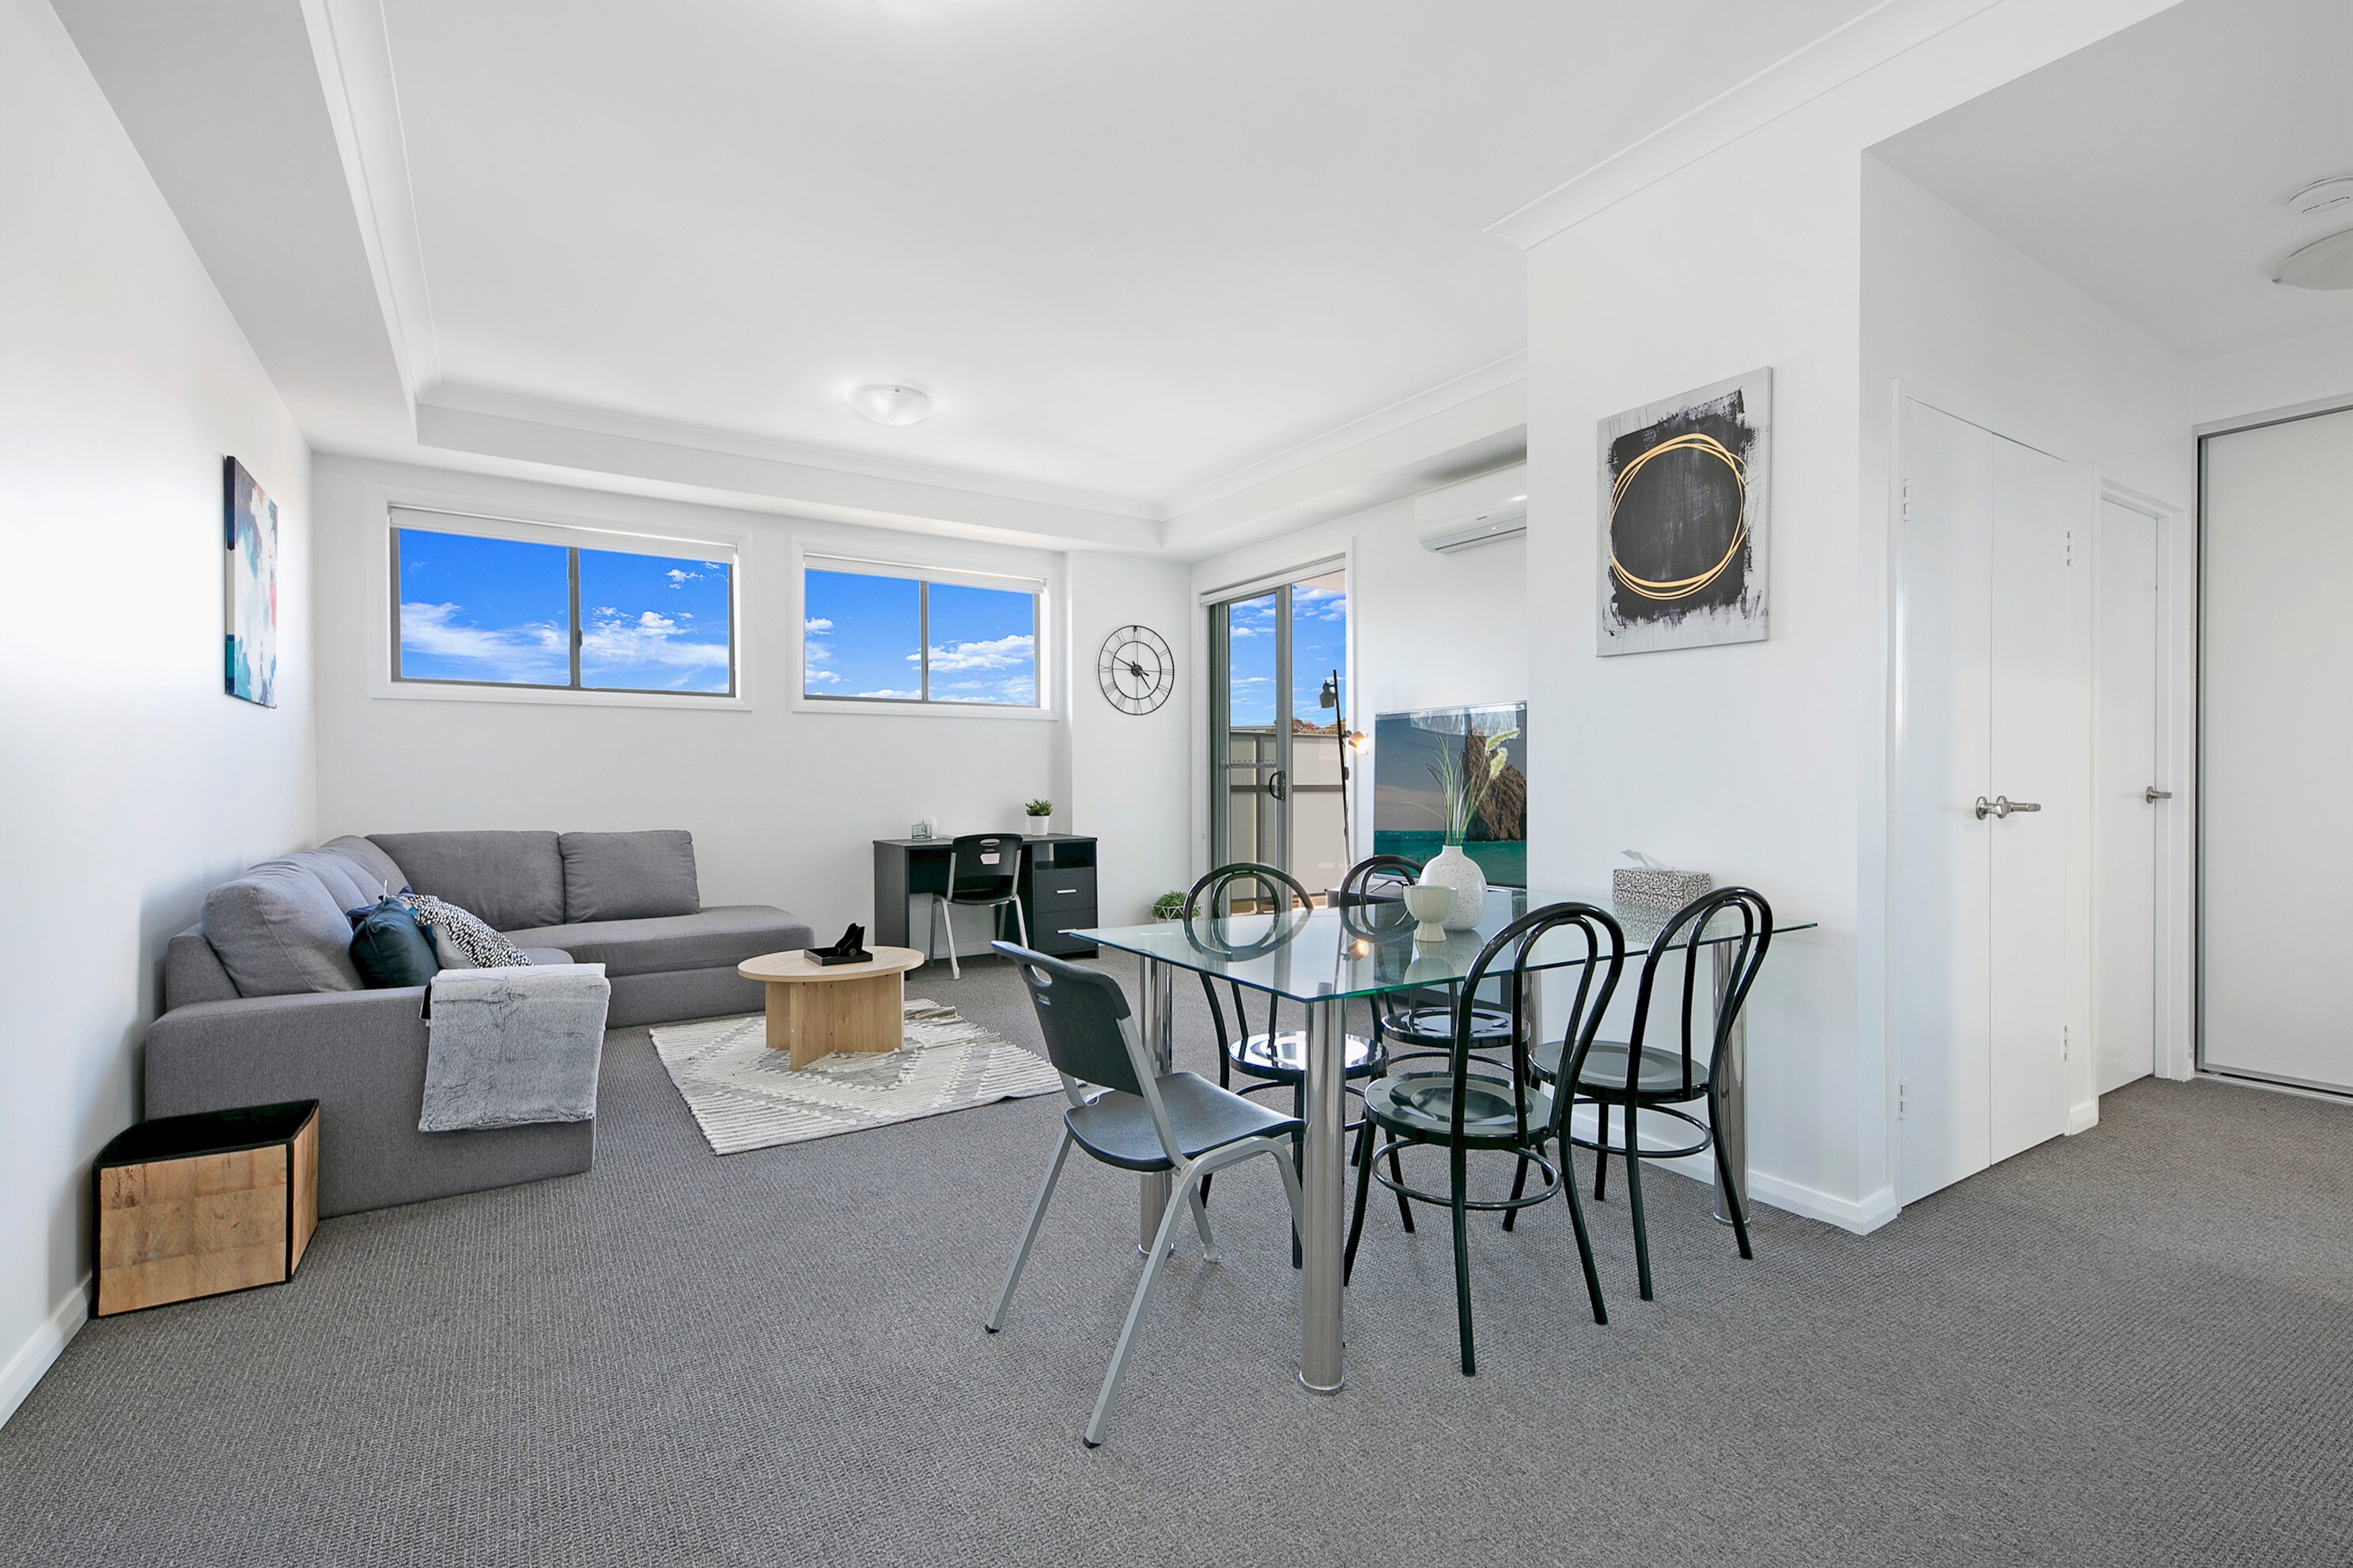 Property Image 2 - Cozy Two Bedroom Apartment in Wentworthville 